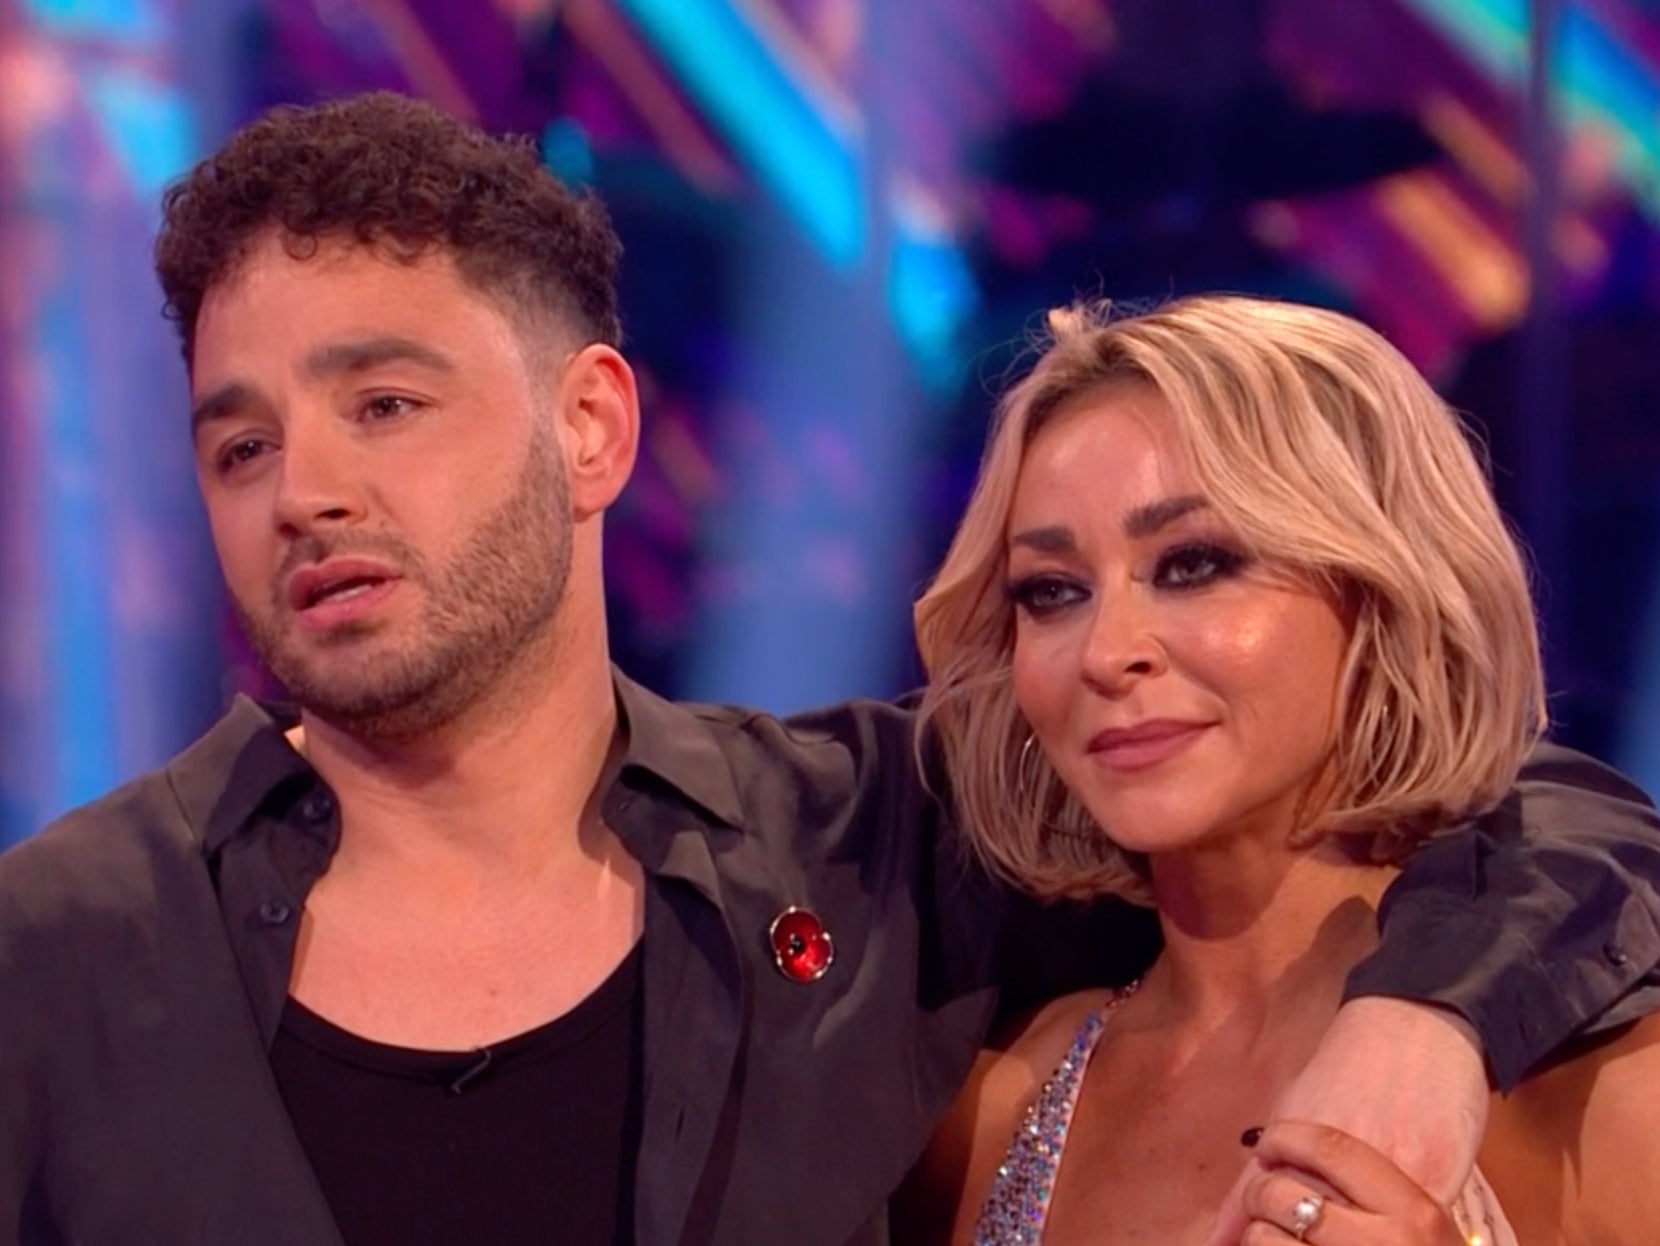 ‘Strictly’ star Adam Thomas was eliminated from the series